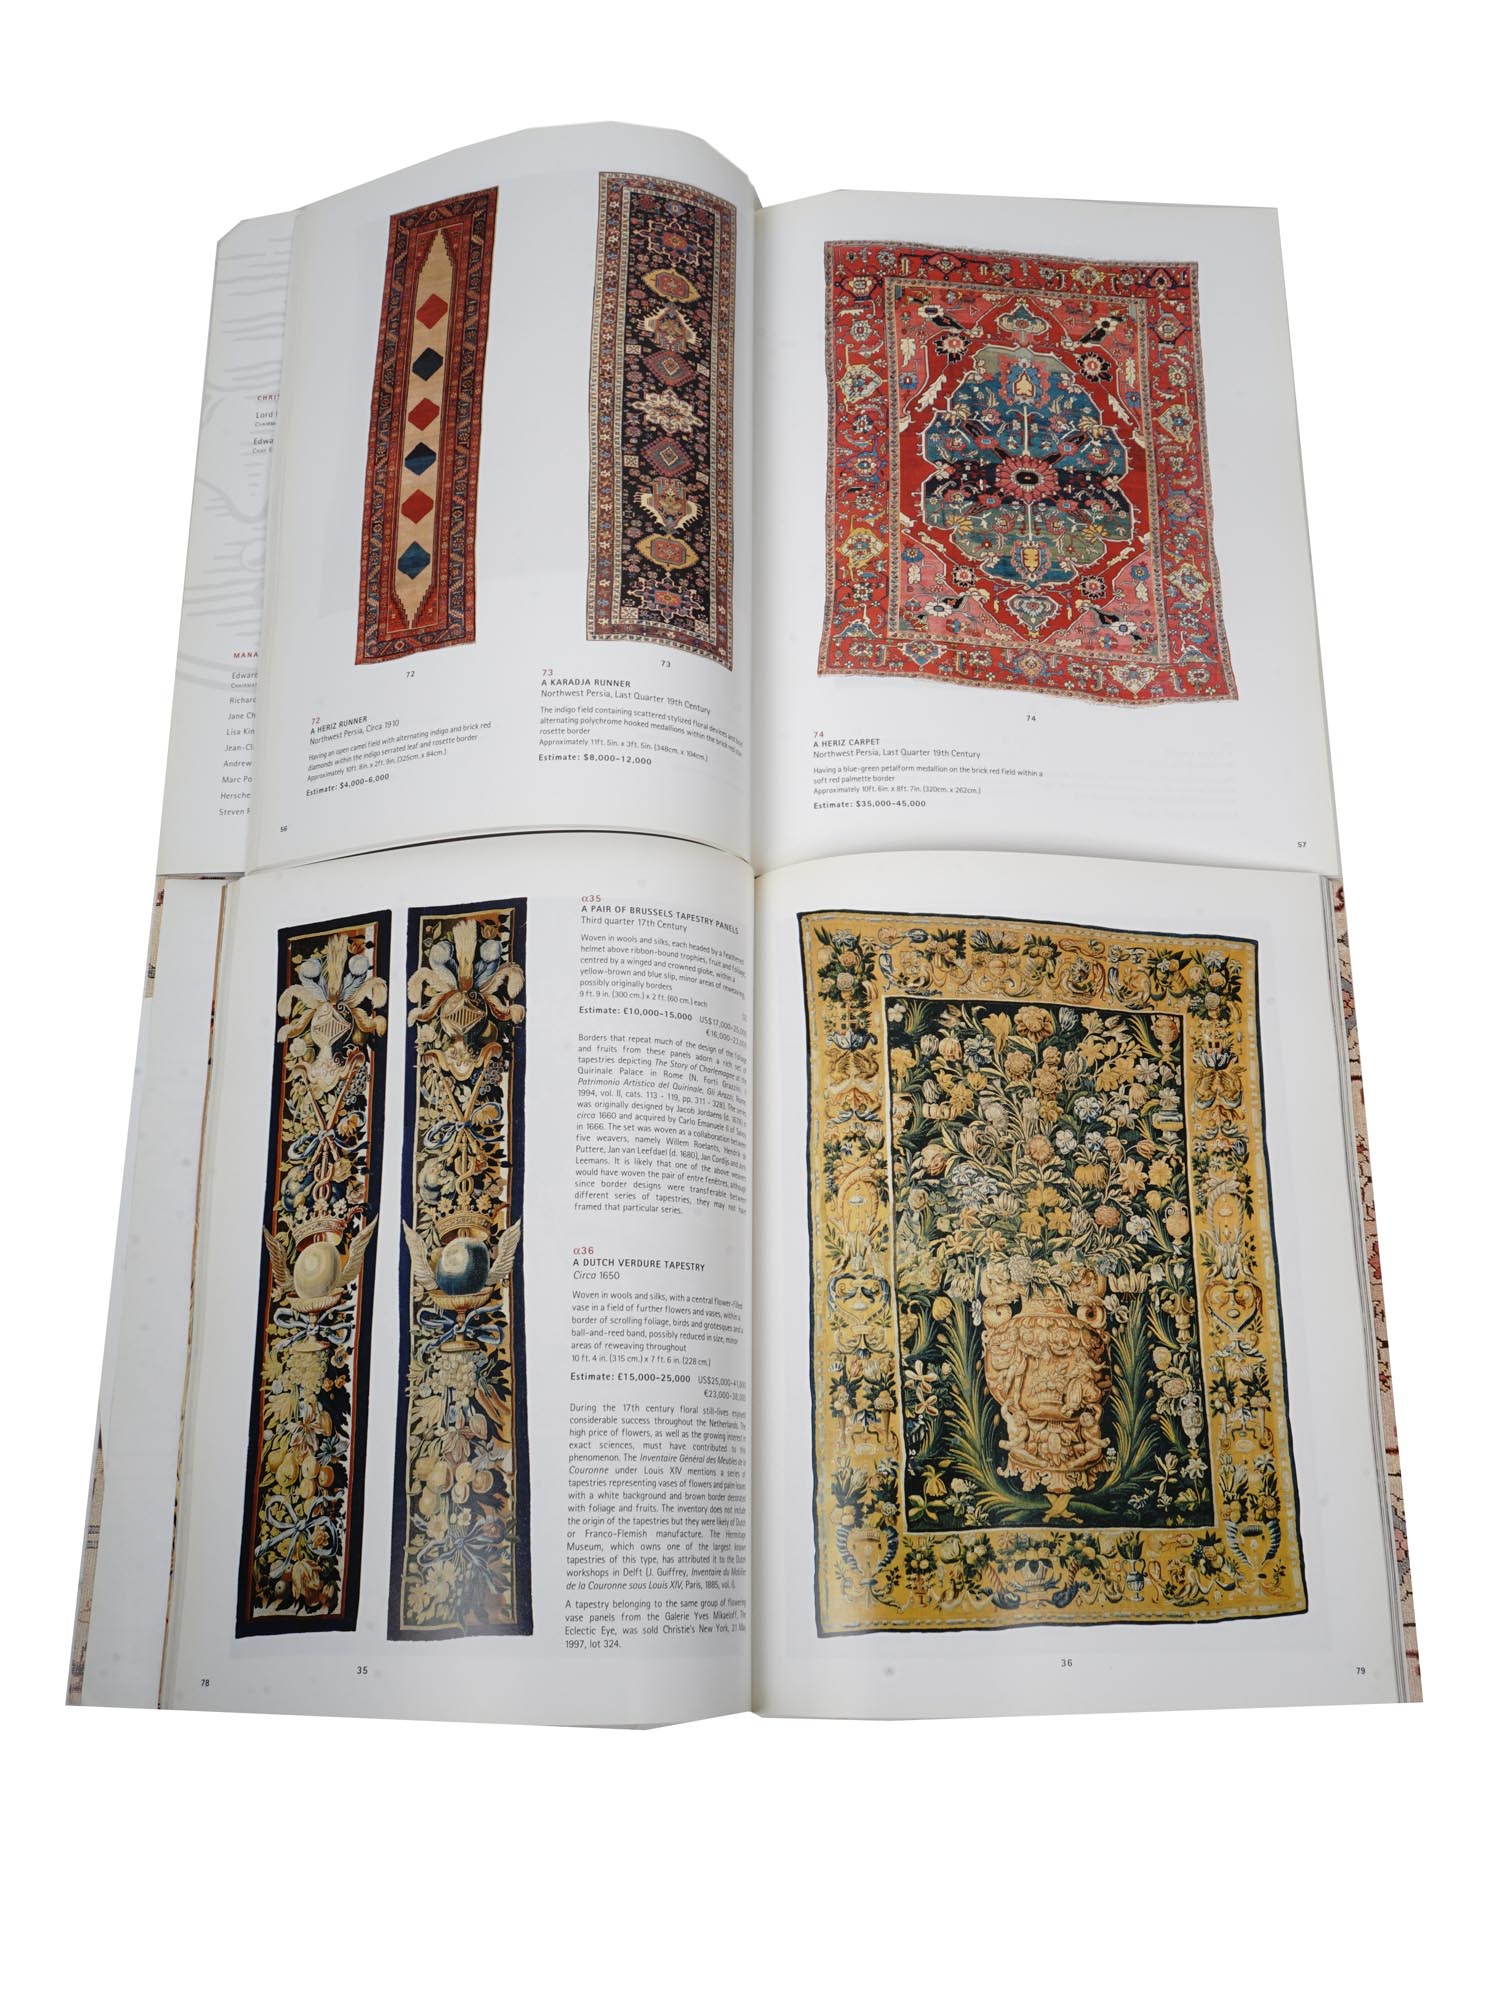 VINTAGE CHRISTIES SOTHEBYS RUG CATALOG COLLECTION PIC-5